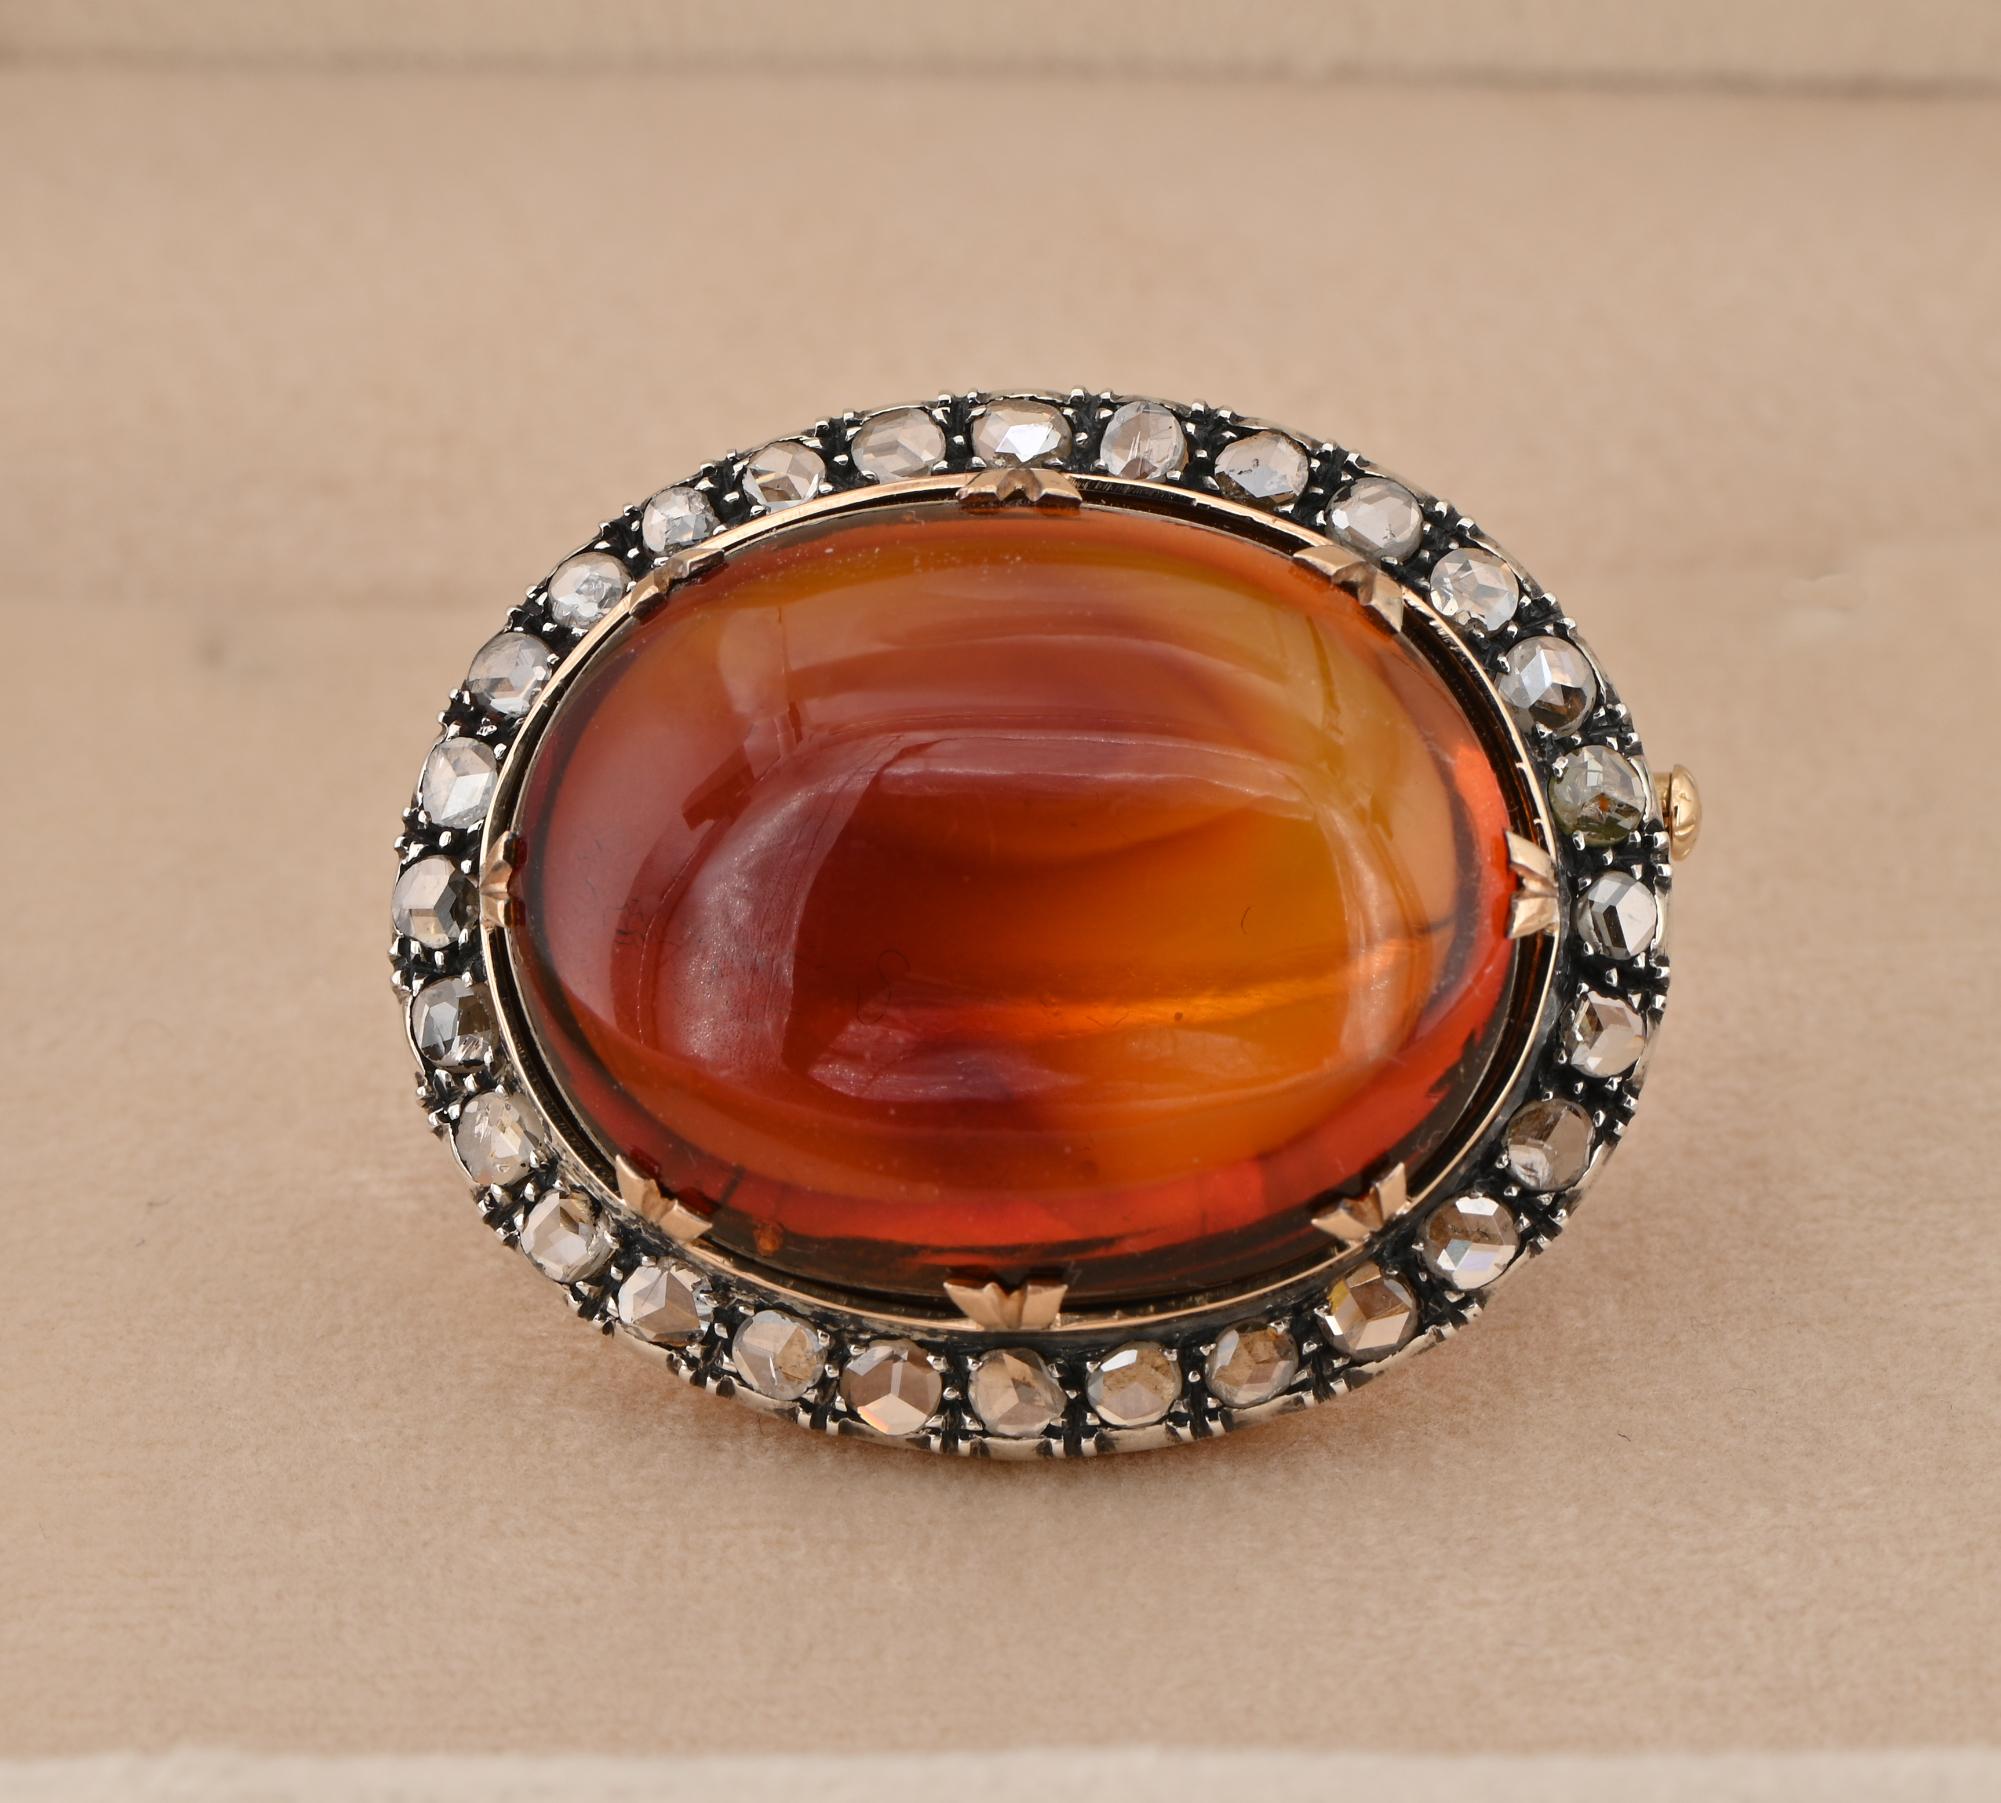 Rare Find
This spectacular and rare antique brooch is 1900 ca
Superbly hand crafted of solid 18 Kt gold with Silver portions for the Diamond setting
The brooch is large and rare example, oval shaped taken from the main stone, beautifully crafted